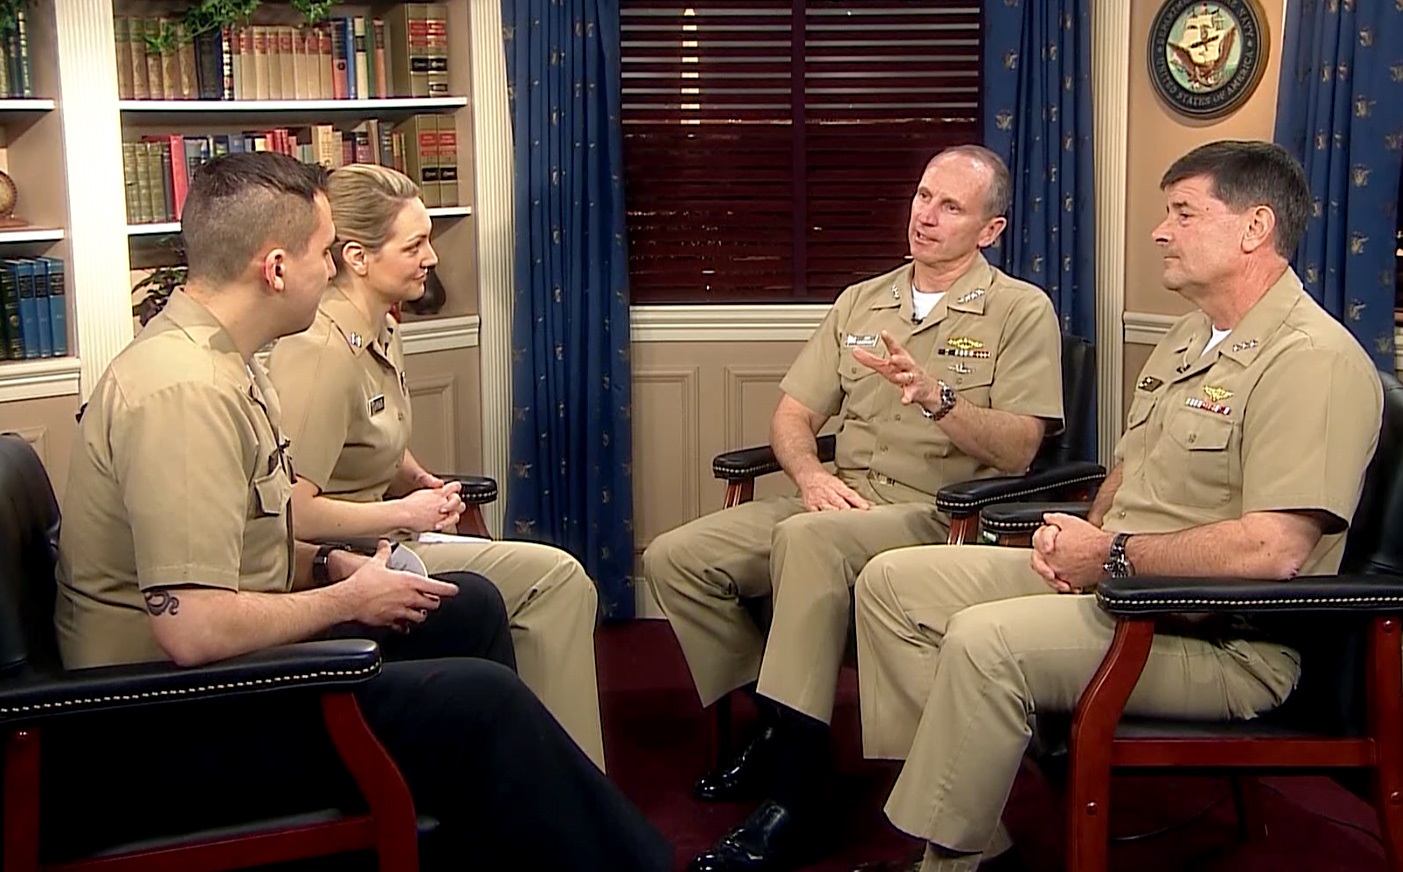 WASHINGTON, (Feb. 23, 2015) Chief of Naval Operations (CNO) Adm. Jonathan Greenert, right center, and Chief of Naval Personnel Vice Adm. Bill Moran, right, talk about personnel challenges with Lt. Caroline Hutcheson, center left, and Mass Communication Specialist 1st Class Elliott Fabrizio during the latest edition of "Conversation With A Shipmate." U.S. Navy photo by Mass Communication Specialist 1st Class Nathan Laird.